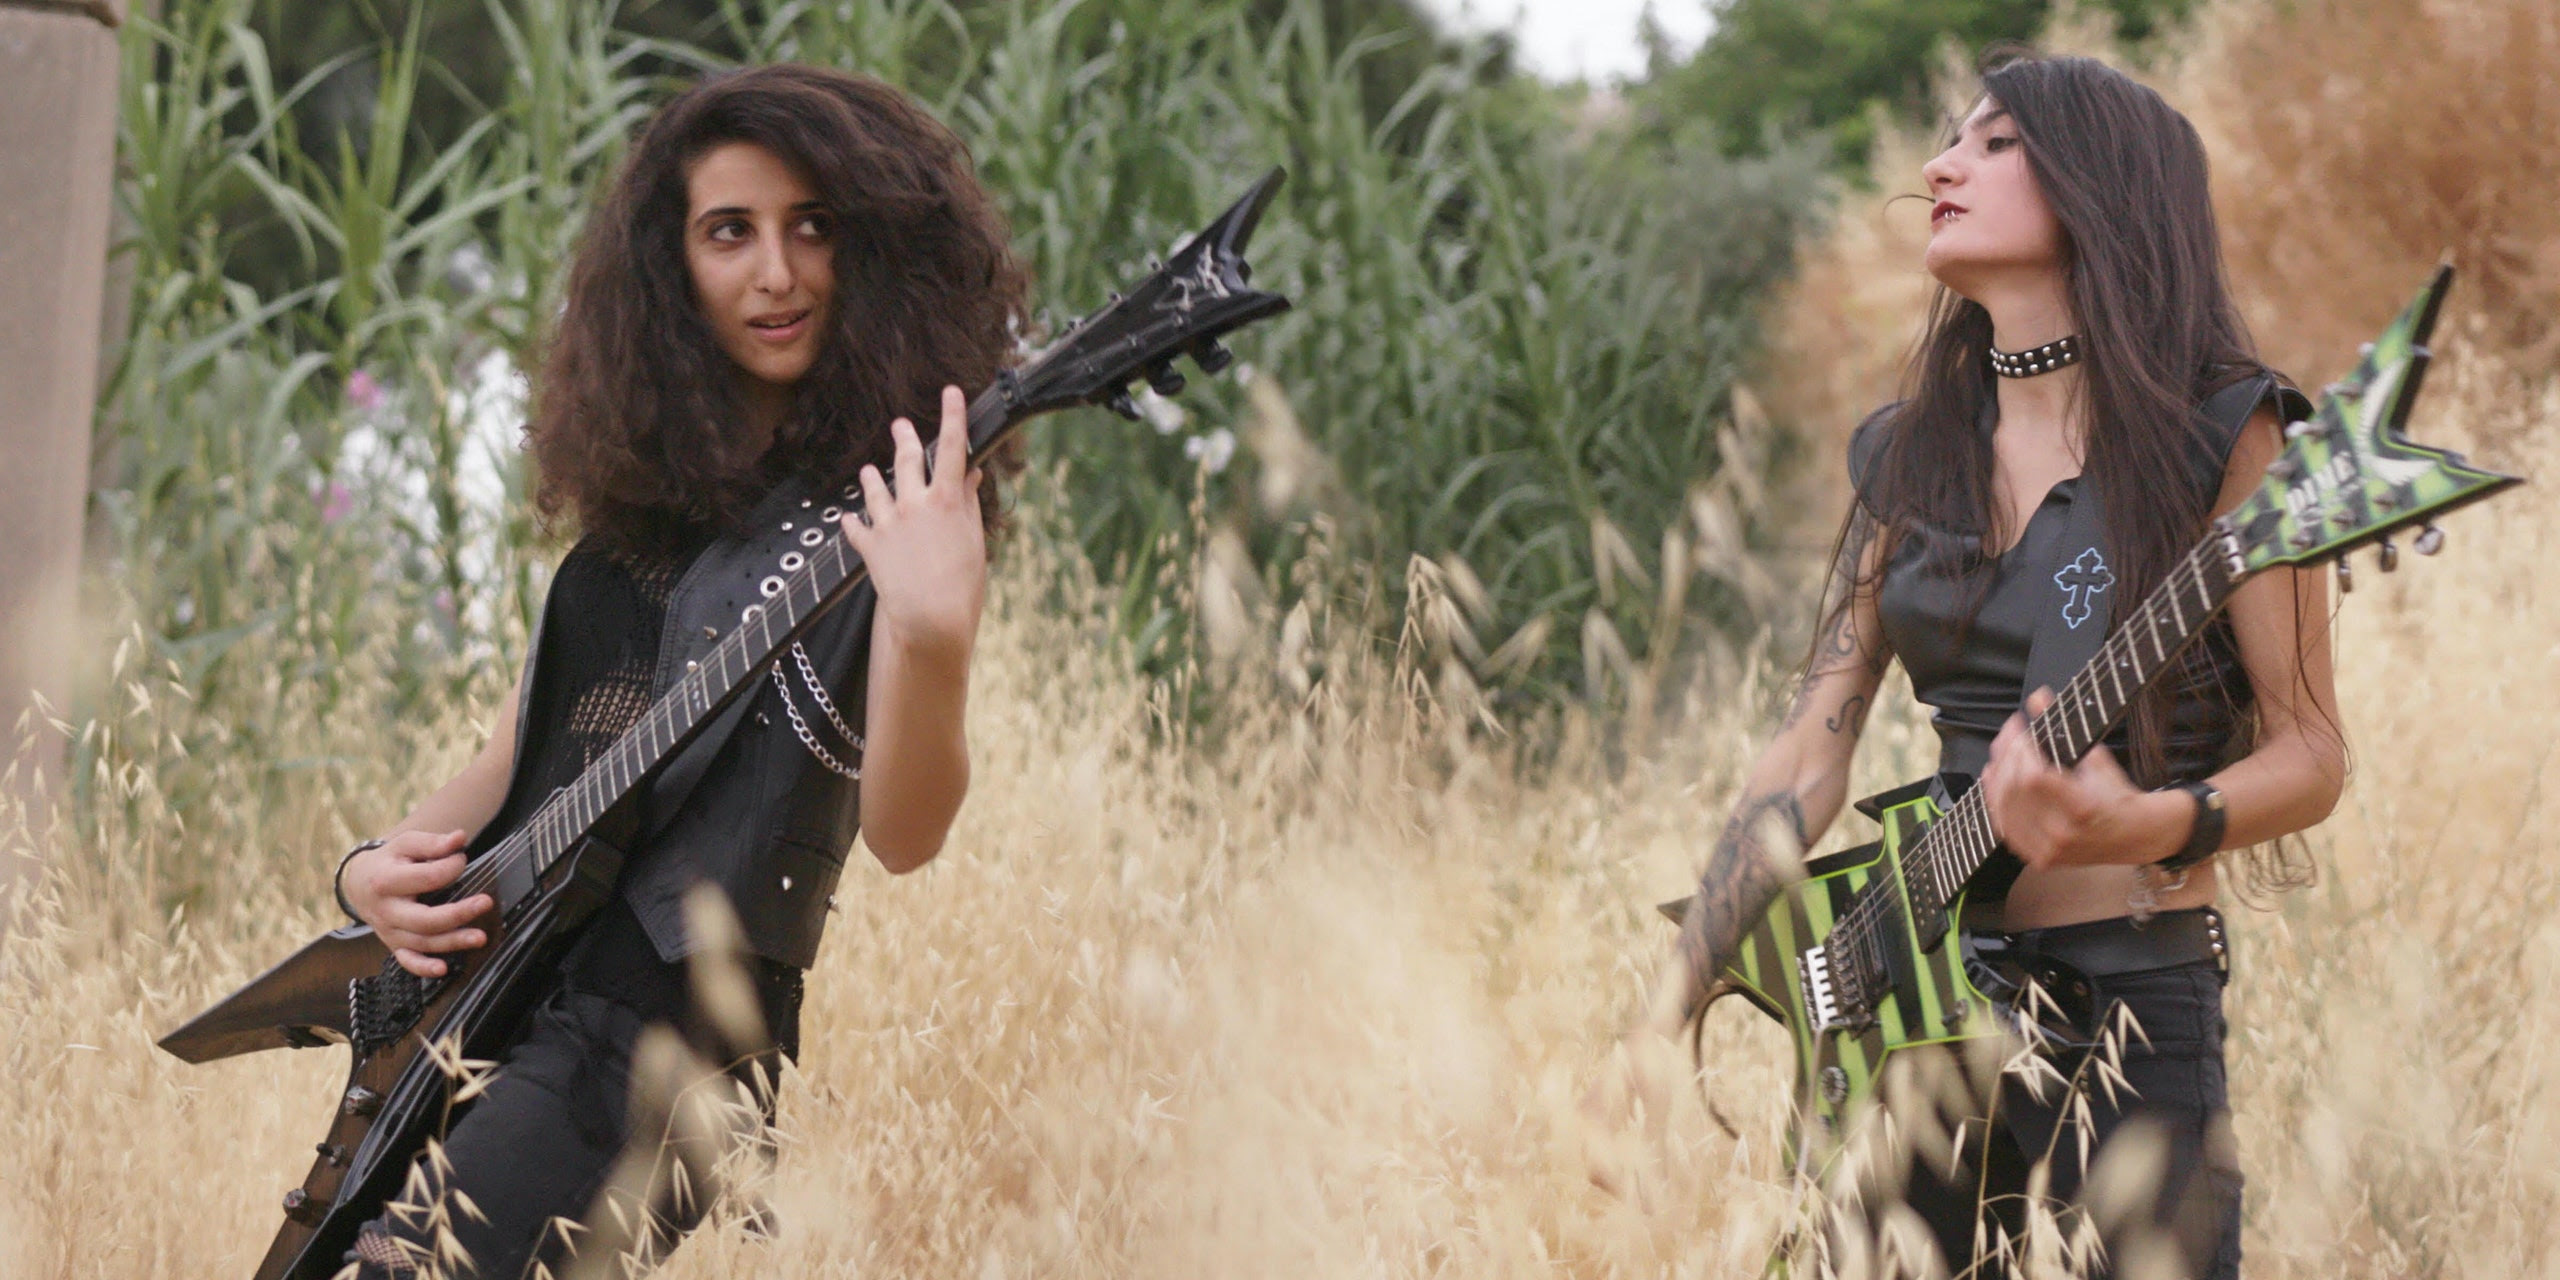 Two women, both with long brown hair and wearing sleeveless vests, perform on their electric guitars in a field of uncut wheat and grass. From Rita Baghdadi's 'Sirens," which is showing in theaters through Oscilloscope Laboratories. Courtesy of Oscilloscope Laboratories . 